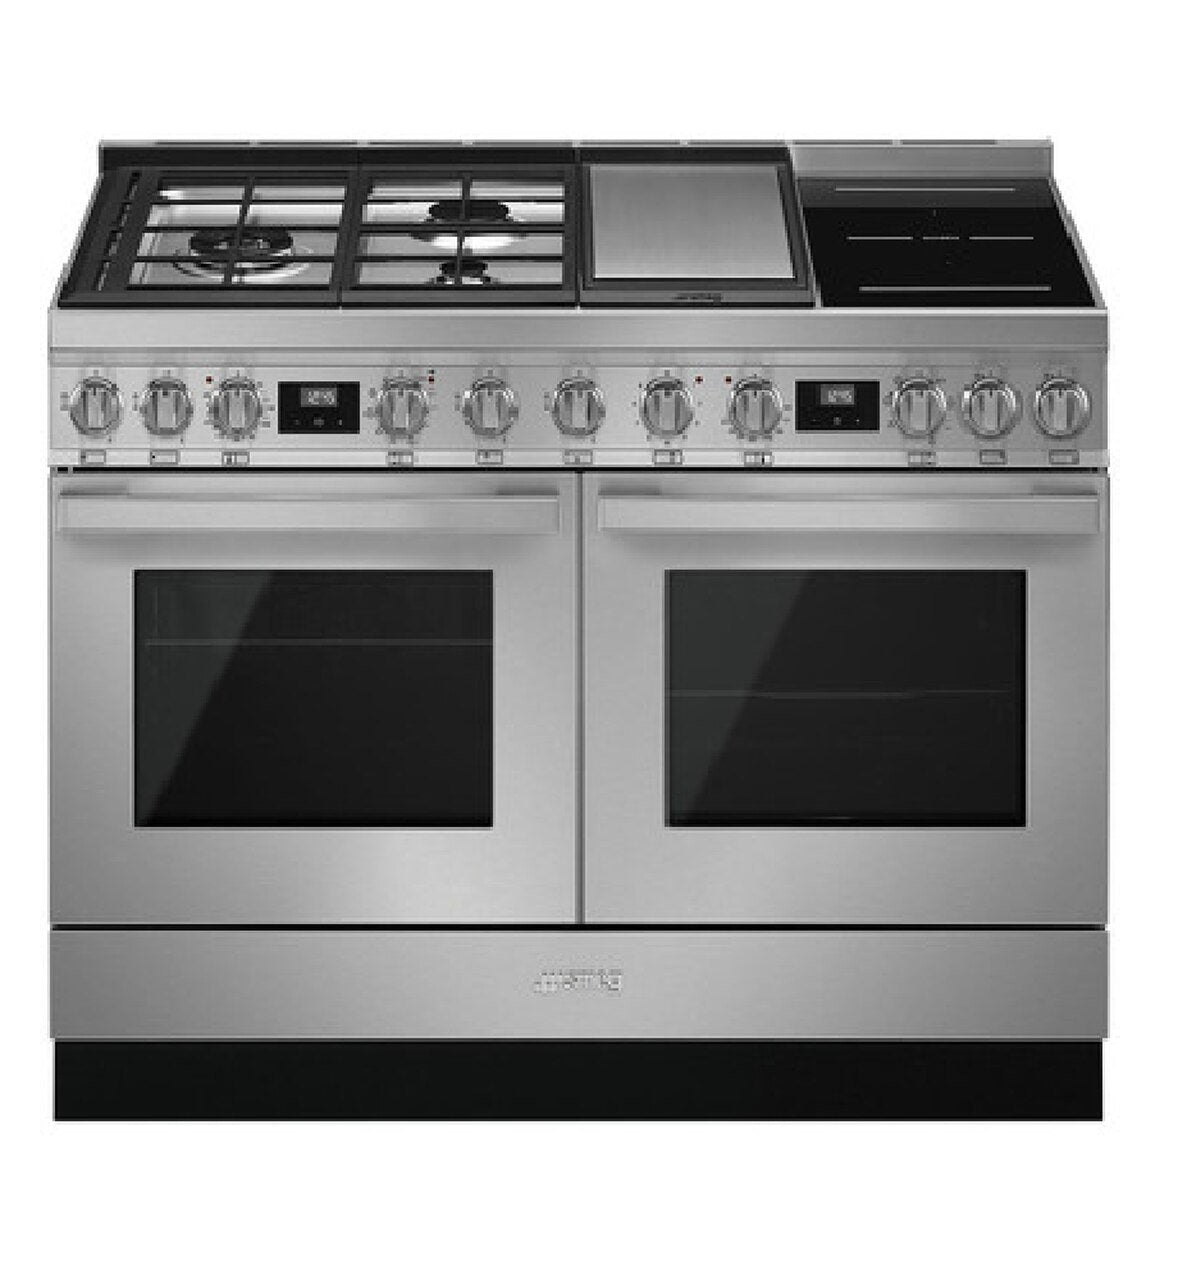 SMEG 120CM PORTOFINO PYROLYTIC FREESTANDING OVEN WITH GAS COOKTOP STAINLESS